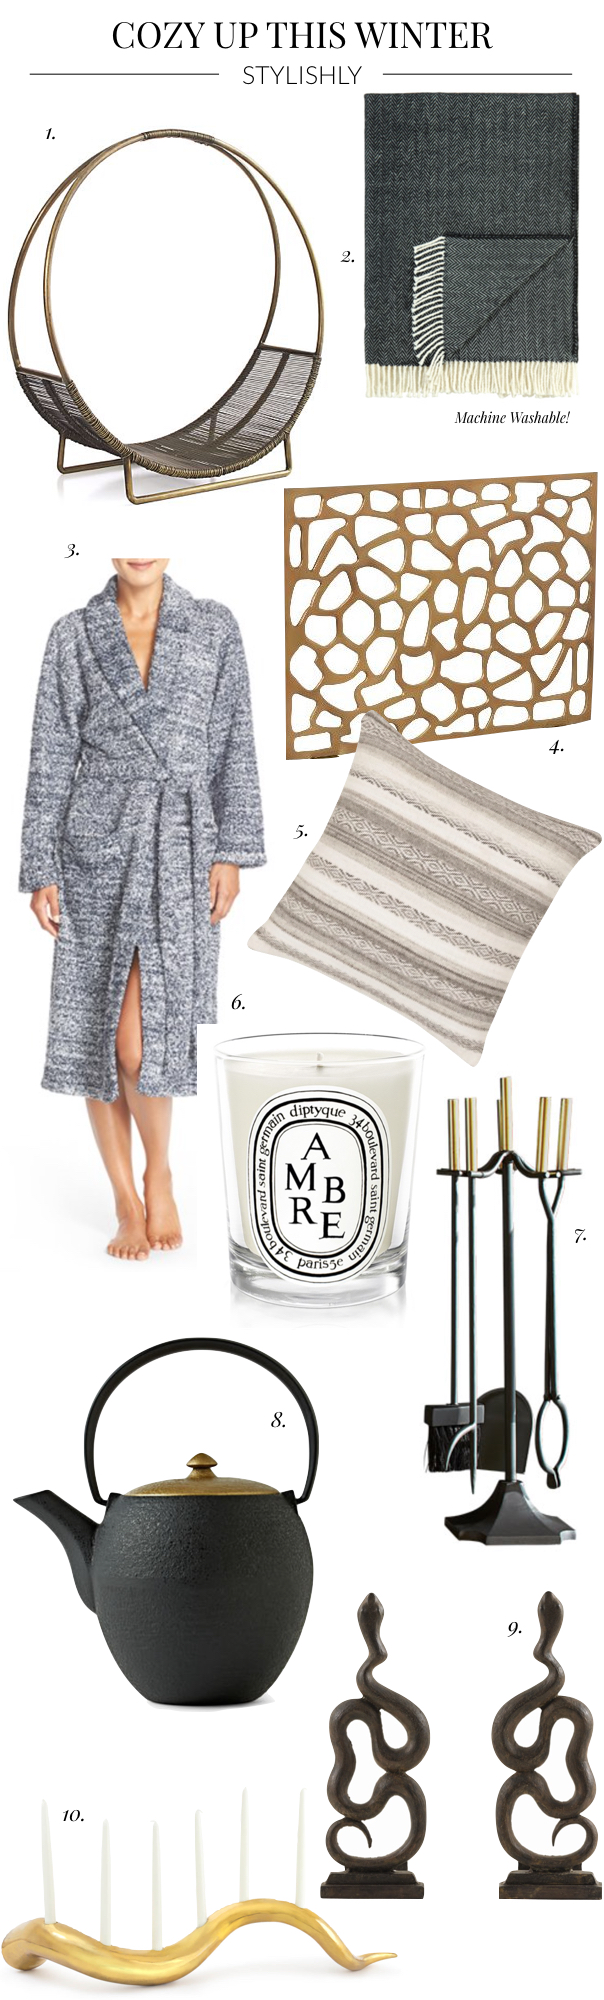 cozy up this winter stylishly